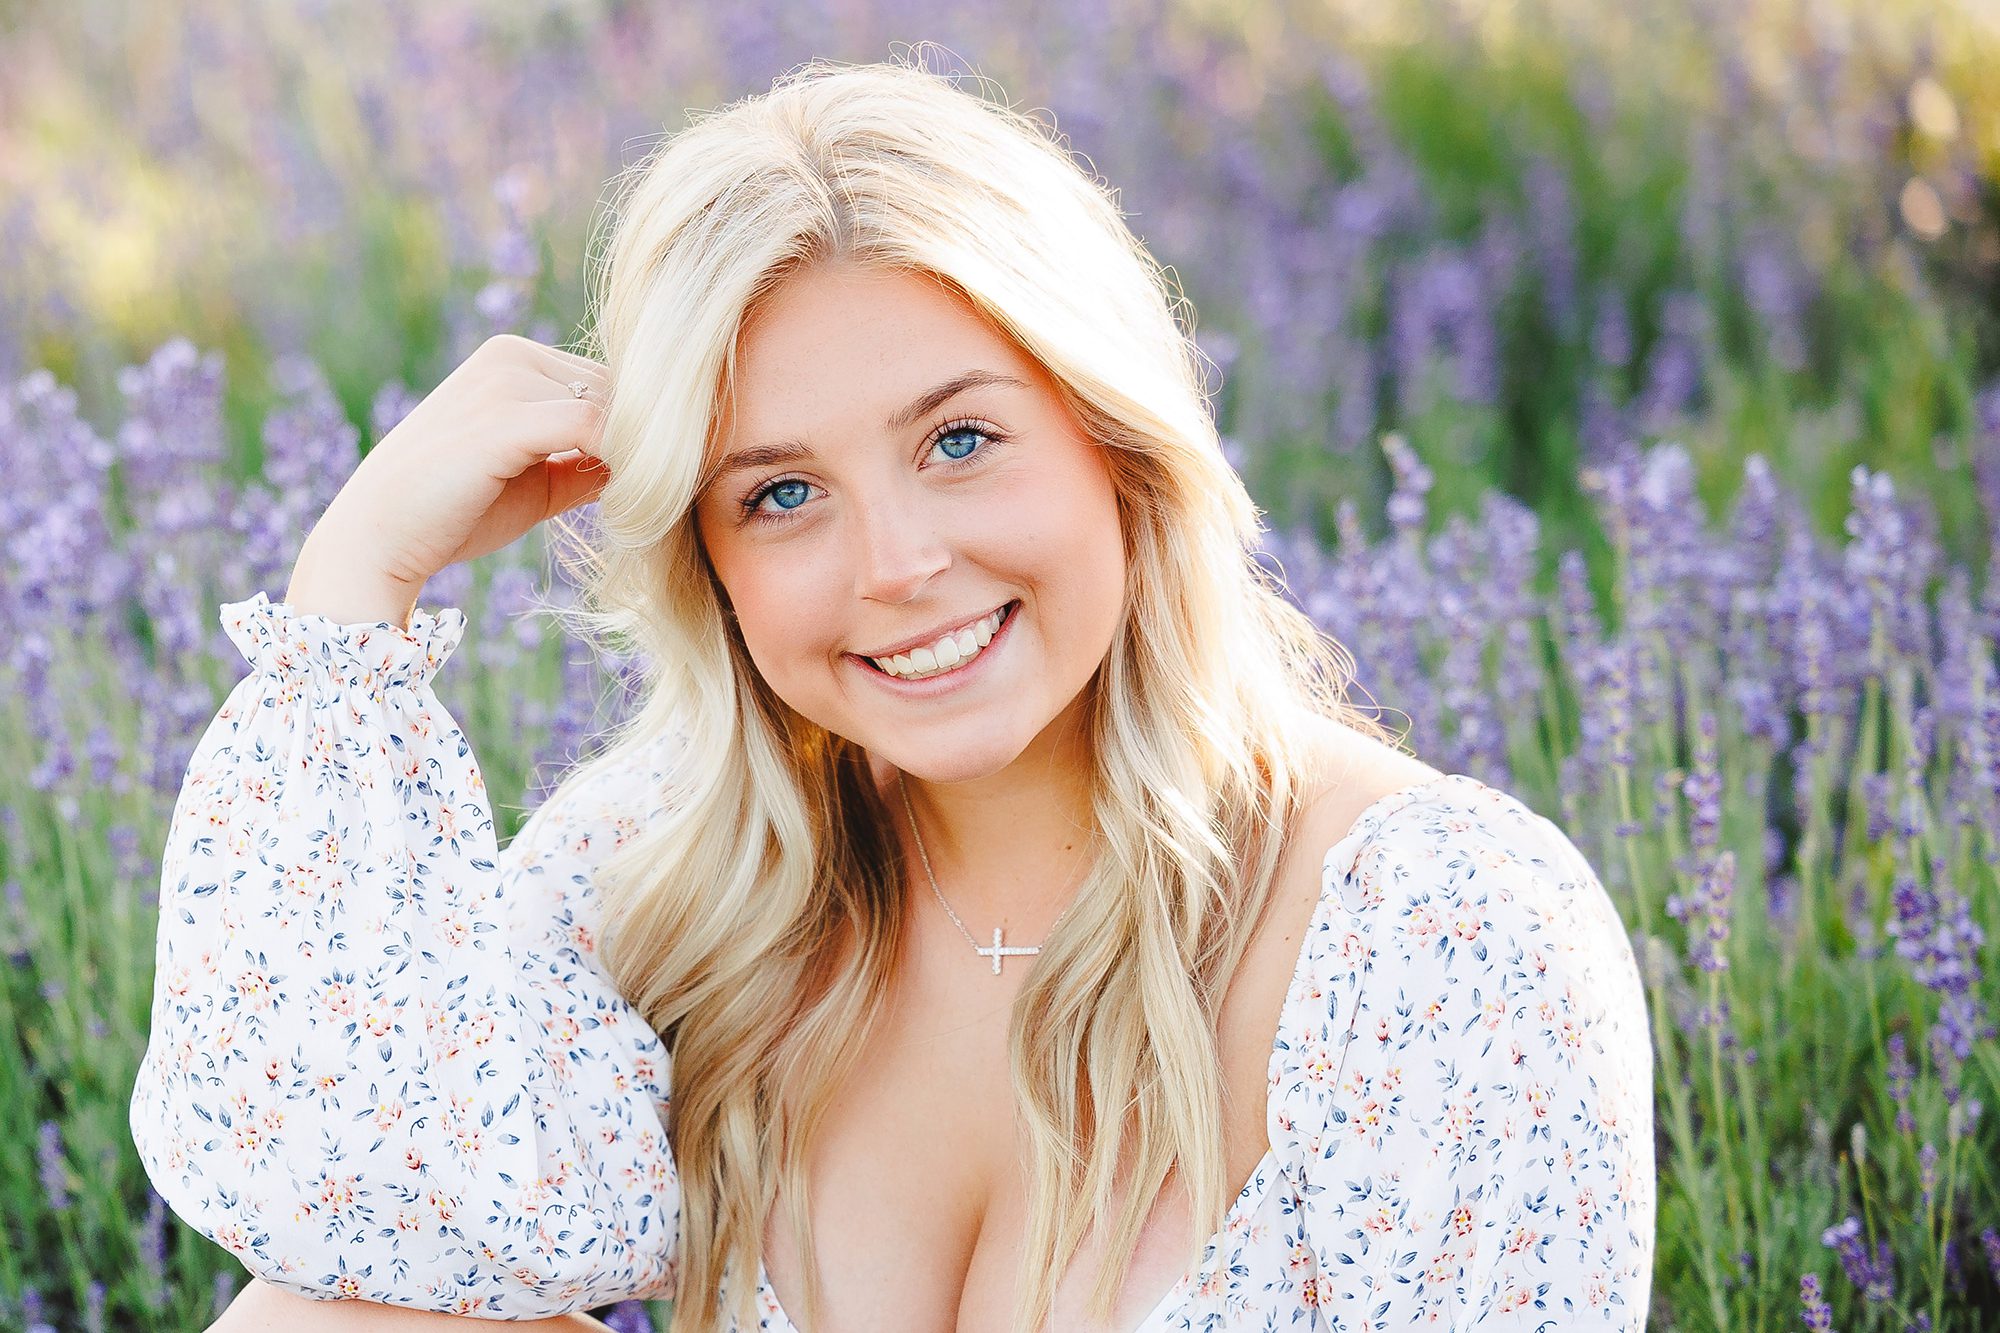 Grove City Senior Photographer captures Riley in a field of lavender